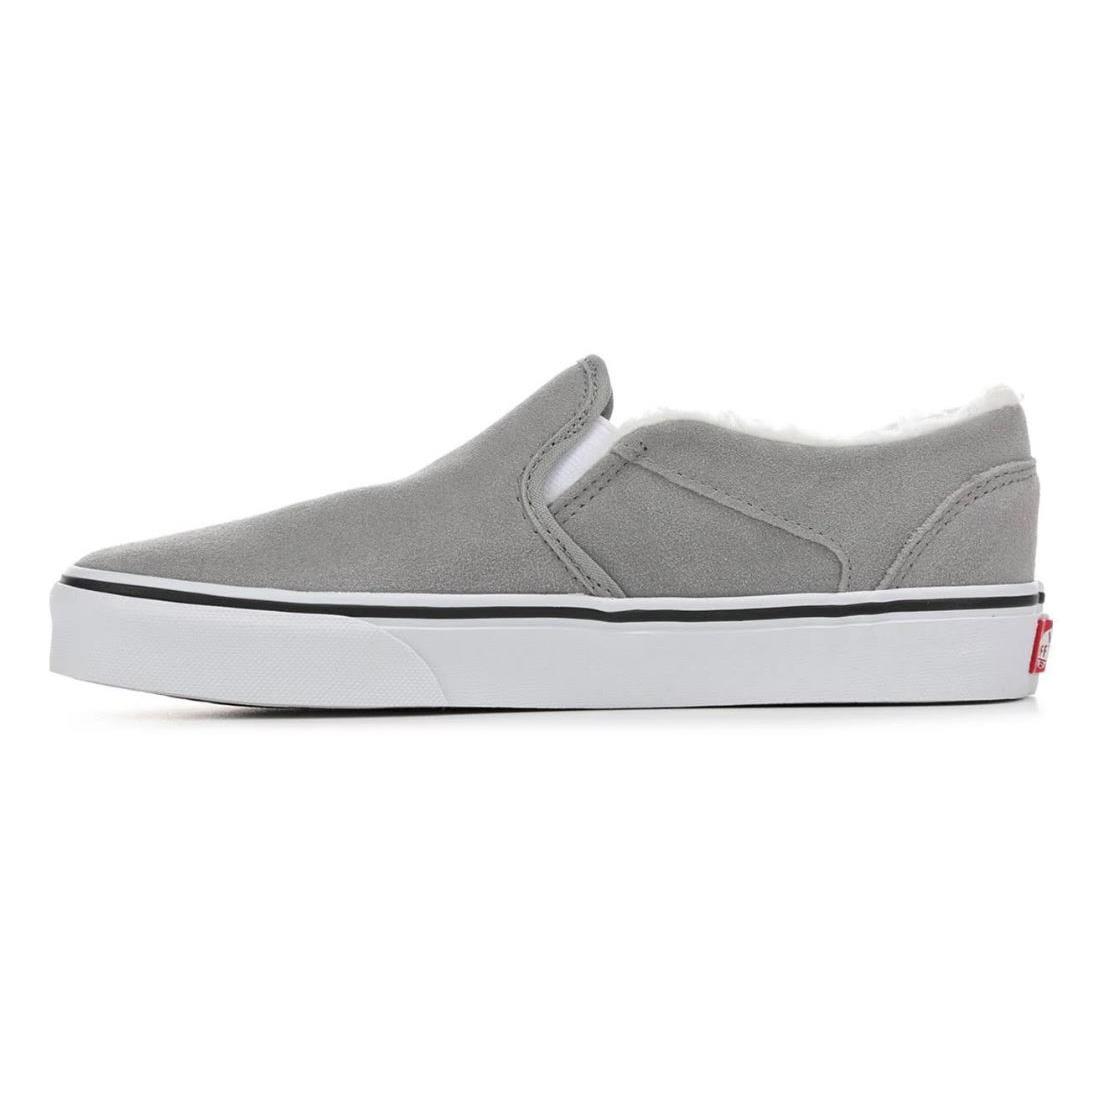 Vans shoes Asher - Gray 0